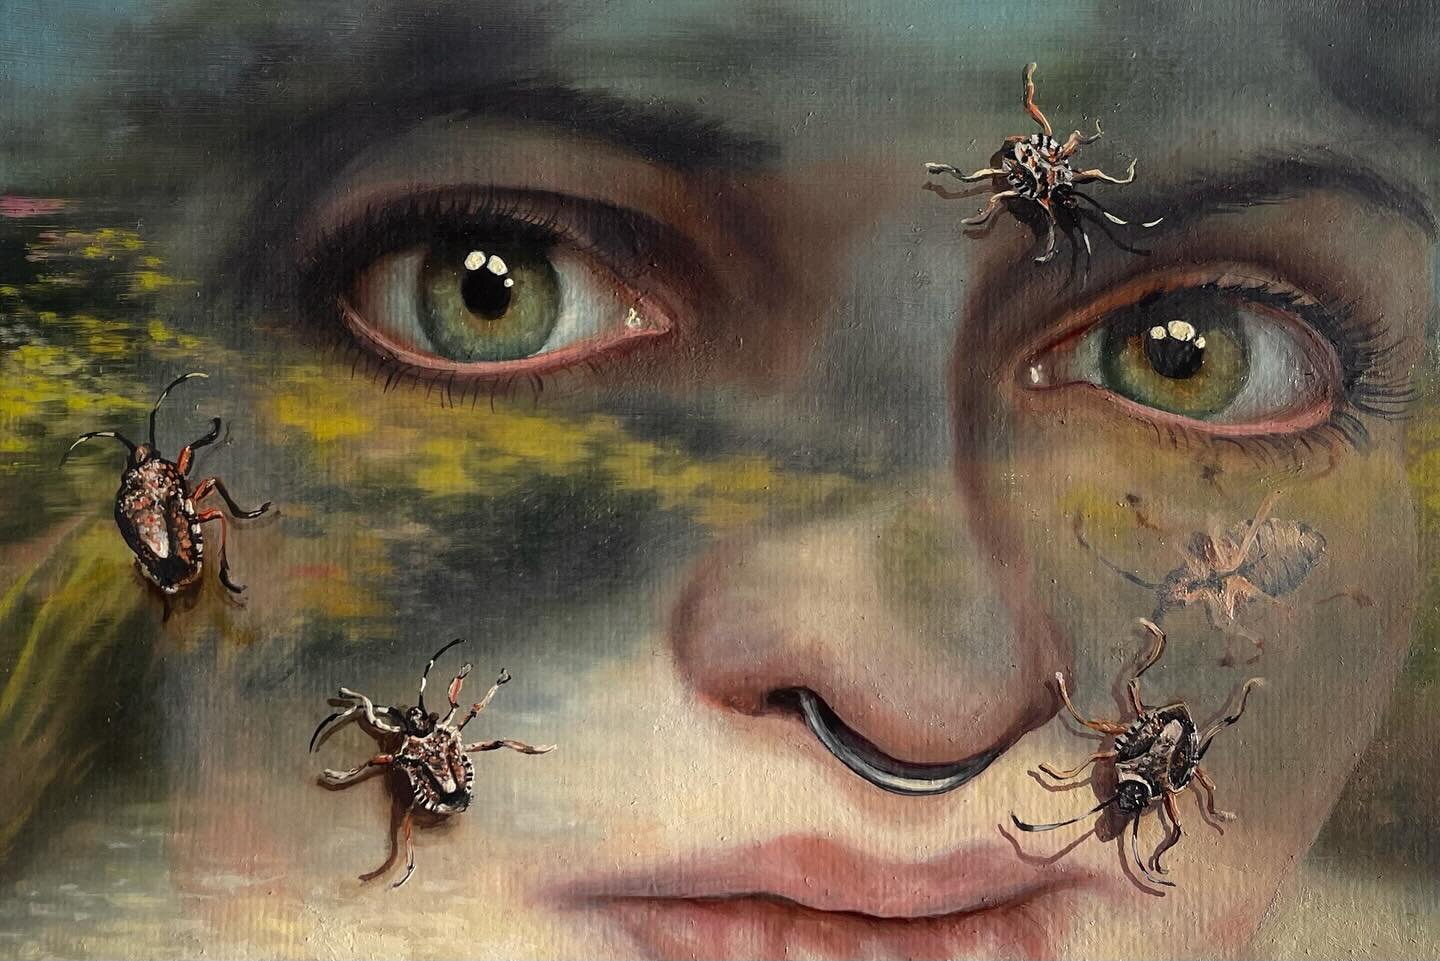 Brand new painting, no title yet! 🪲👁️🪲👁️🪲

#oilpainting #portaitpainting #contemporarypainting #surrealart #surrealportrait #insectpainting #stinkbug #brownmarmoratedstinkbug #newcontemporary #newcontemporaryart